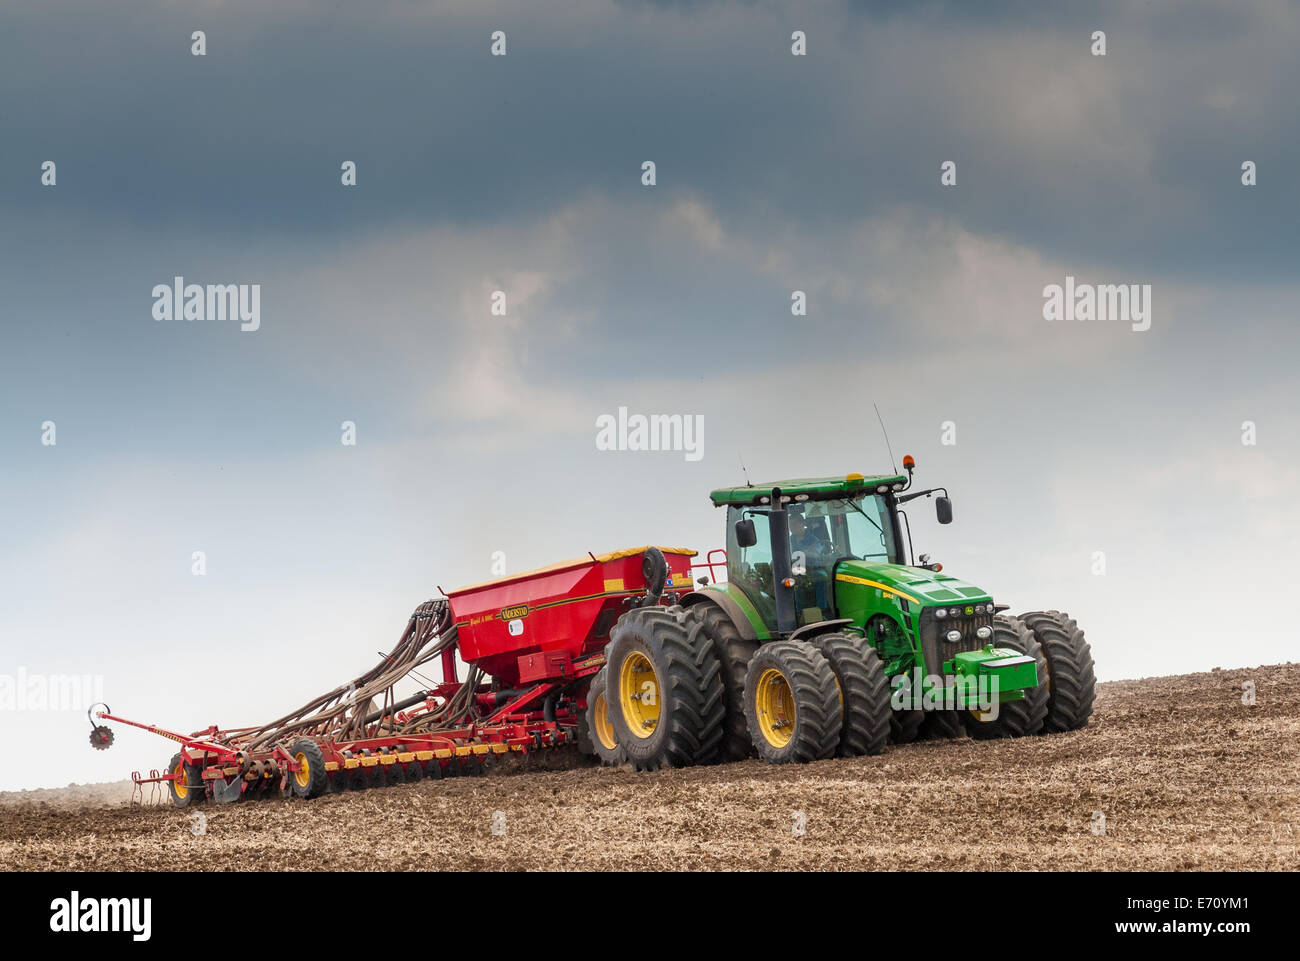 Farm tractor with a drill on the back, drilling, or sowing, grass seed onto a field that has been prepared or plowed (ploughed) Stock Photo